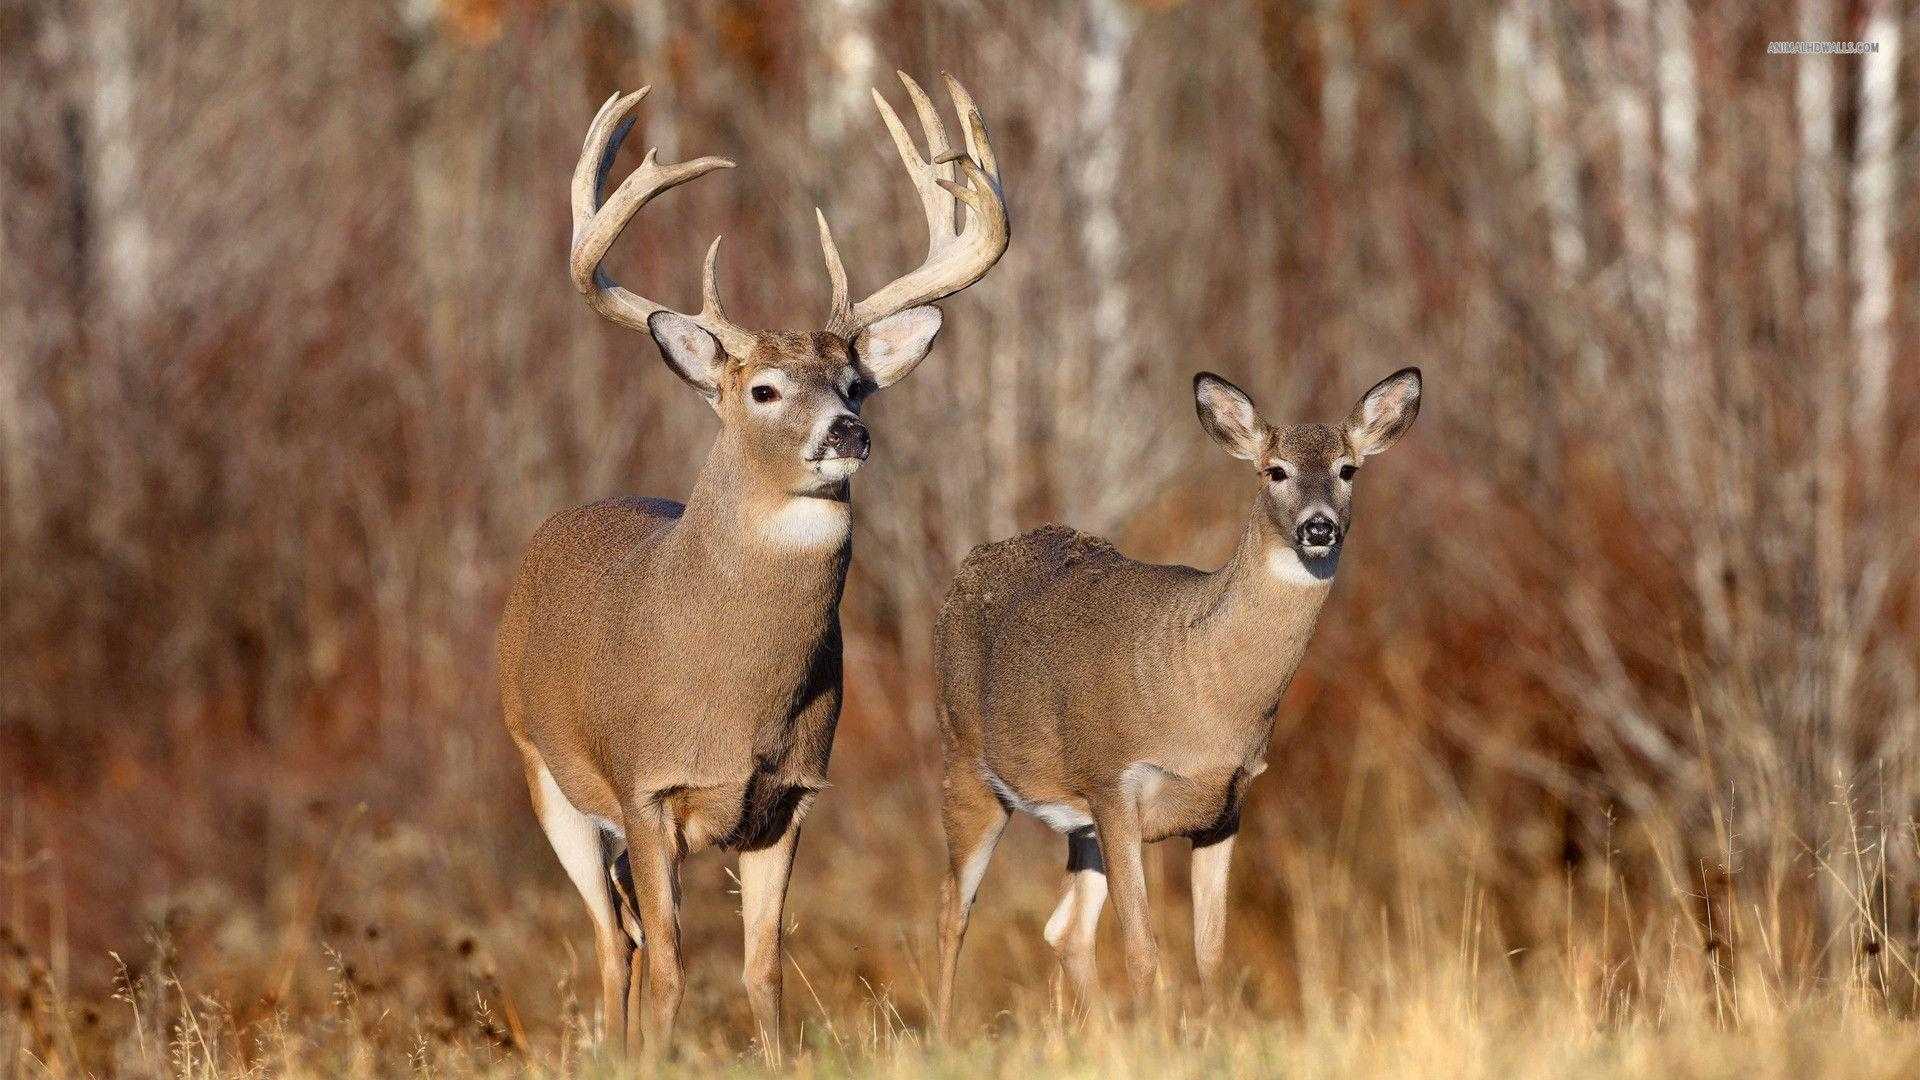 Deer Hunting Wallpaper HD Pics Widescreen Whitetail Background Of